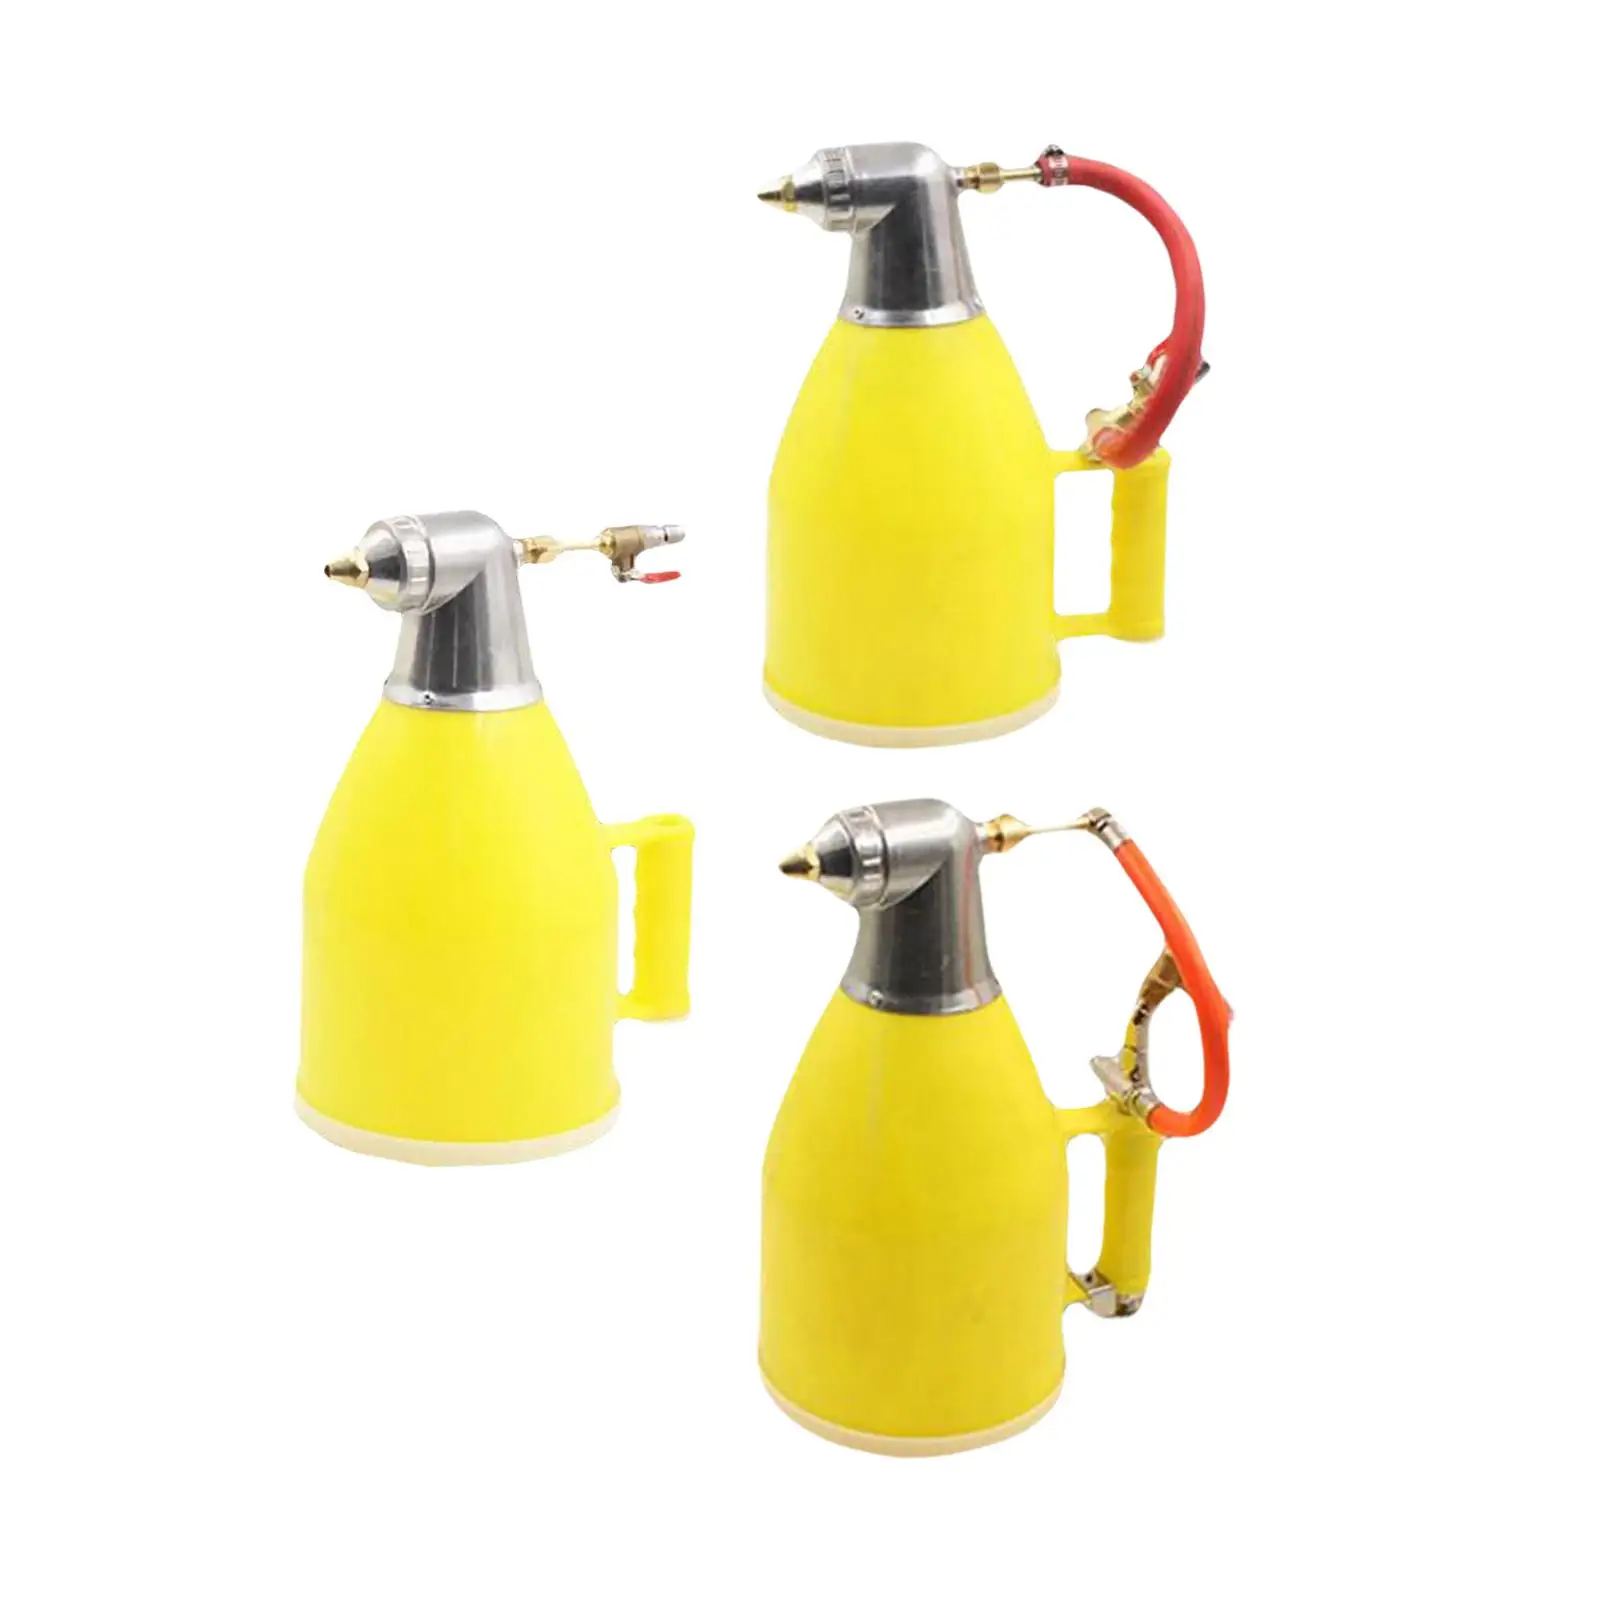 Pro Air Hopper Spray Gun Painting Sprayer Paint Texture Drywall Hopper Lance 3L Airbrush Tool for Car Coating Lacquering Cement